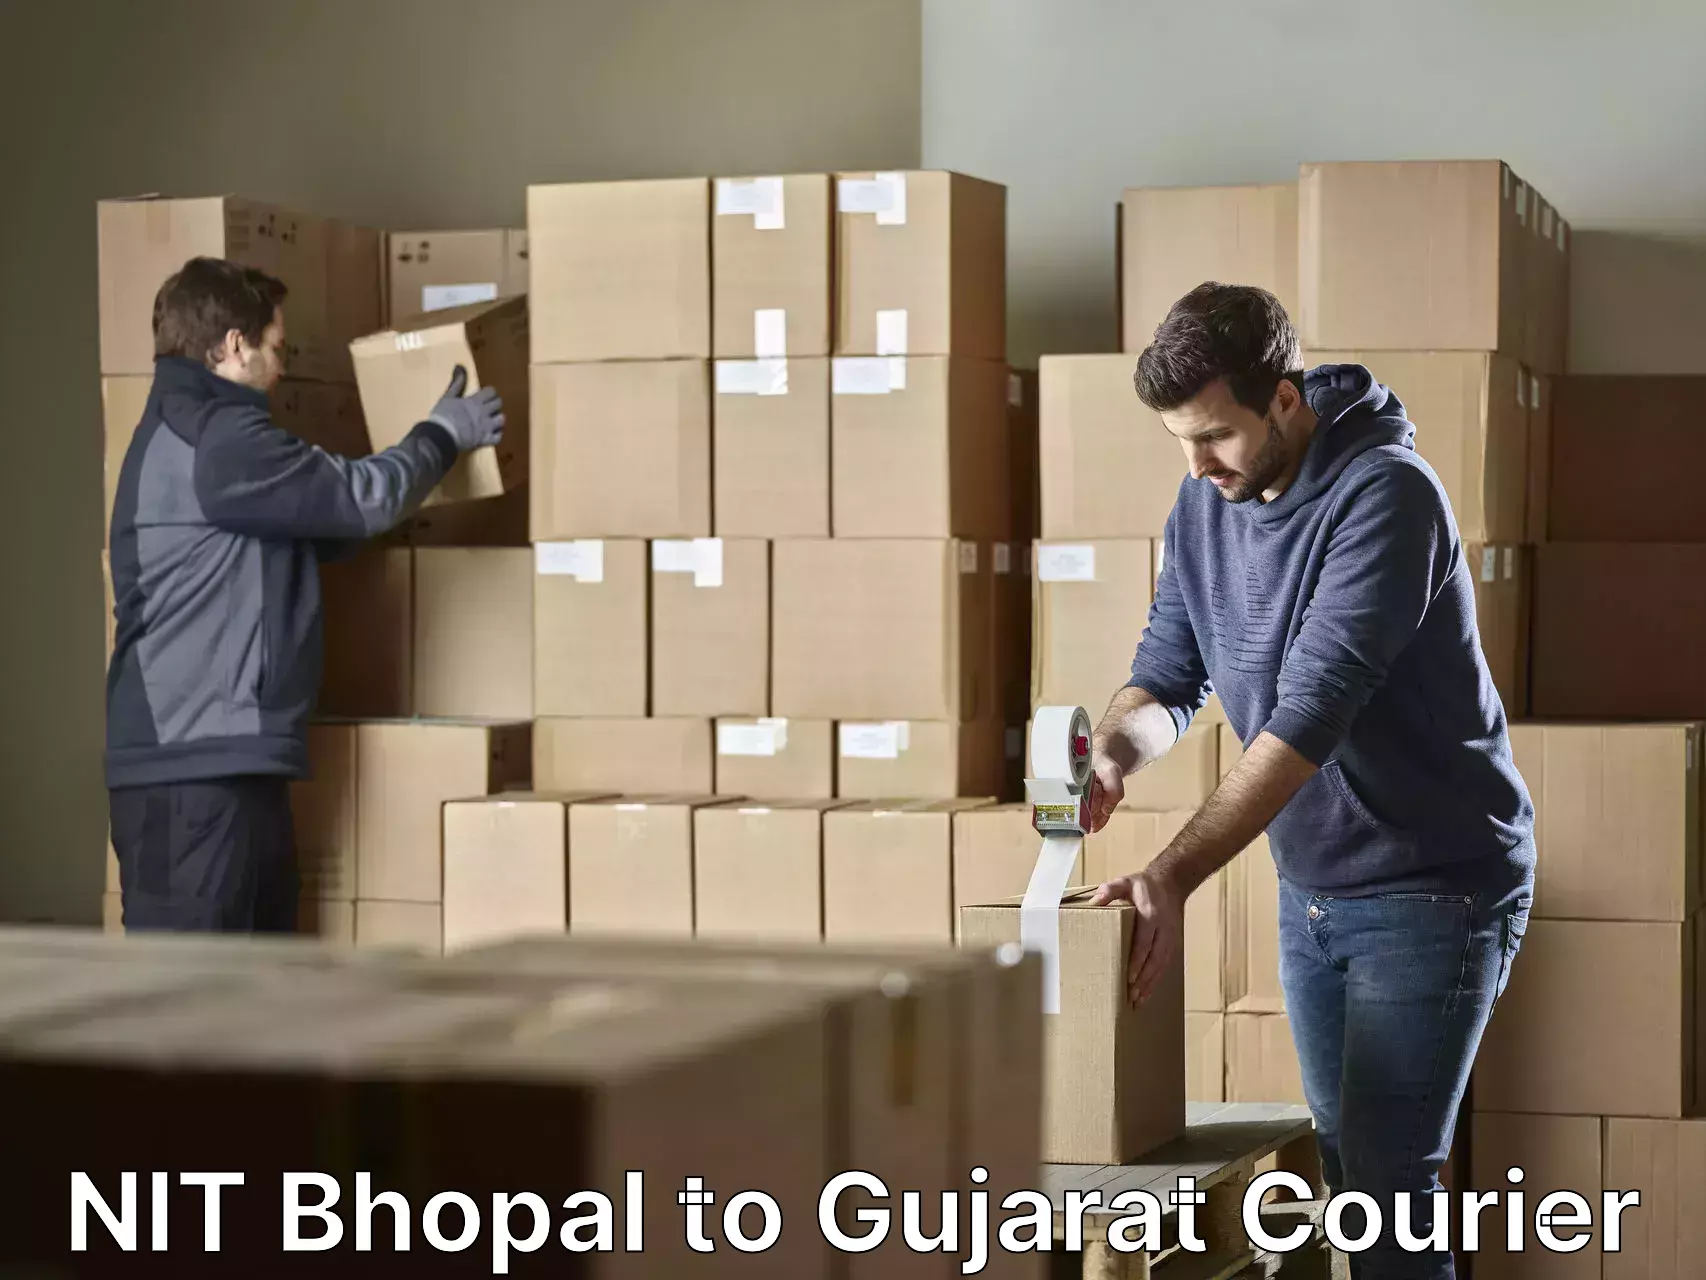 Quality relocation services NIT Bhopal to Gujarat